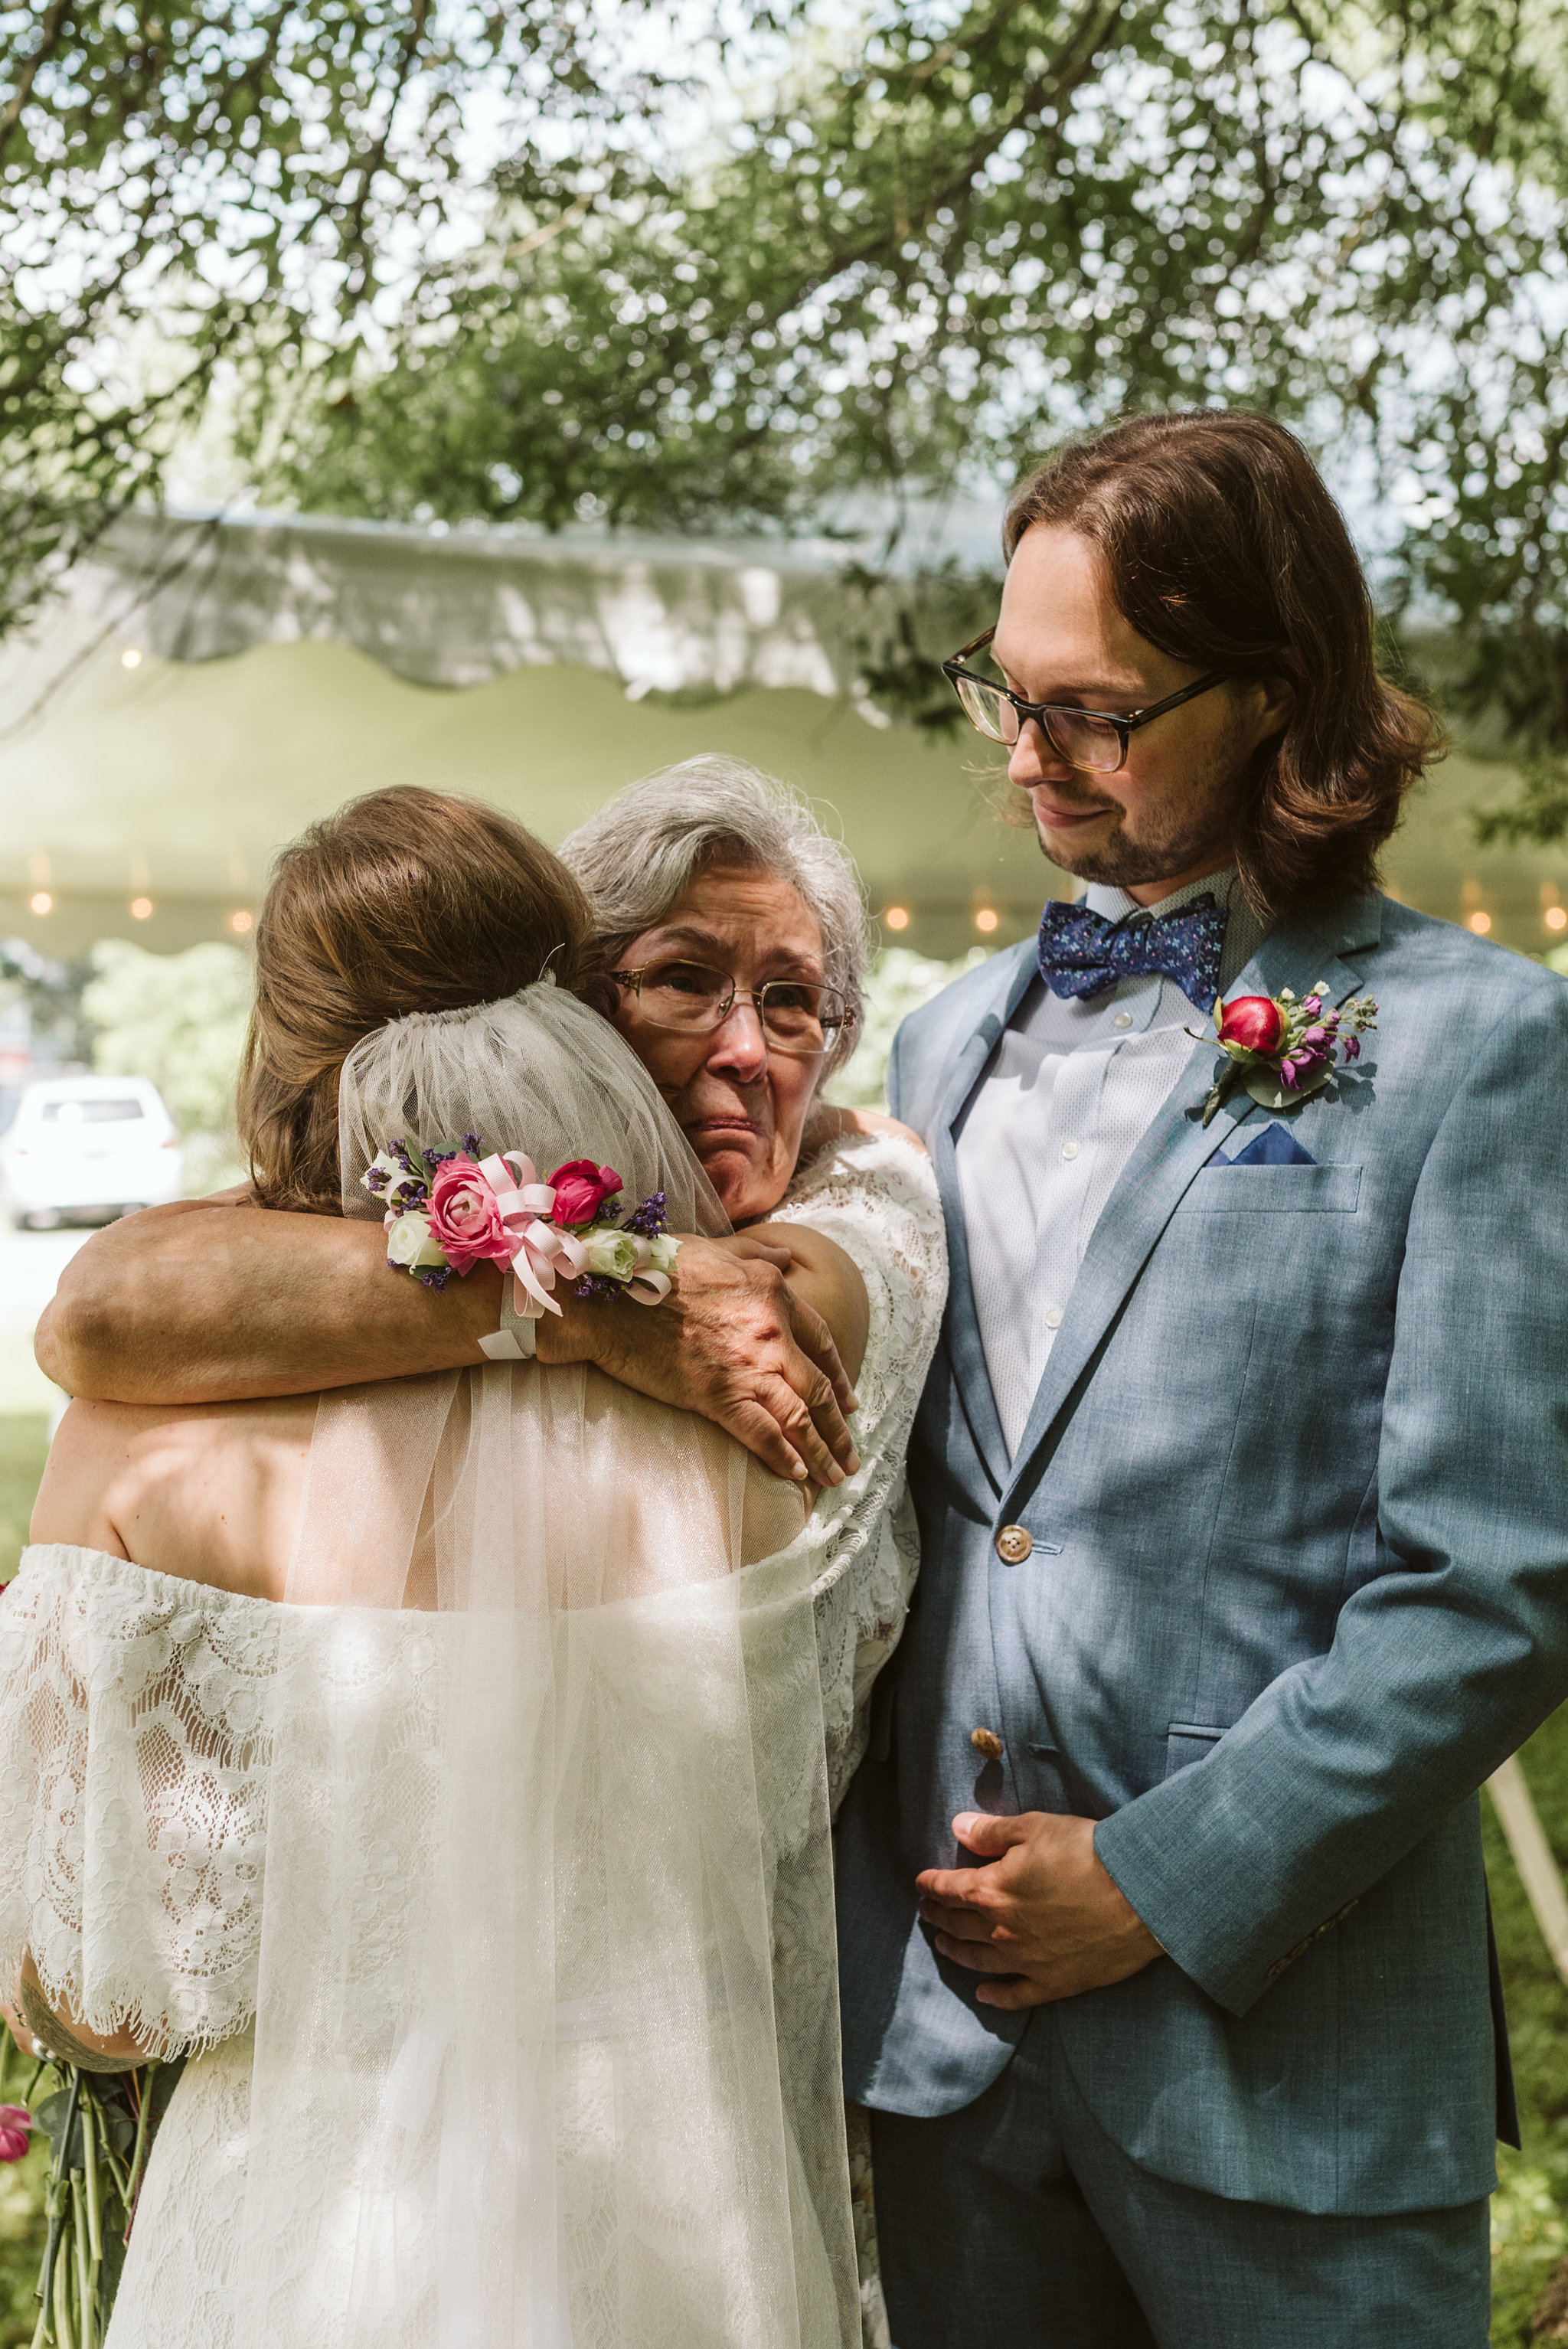  Annapolis, Quaker Wedding, Maryland Wedding Photographer, Intimate, Small Wedding, Vintage, DIY, Bride and Groom with Mother of the Bride, Bride Hugging Mother 